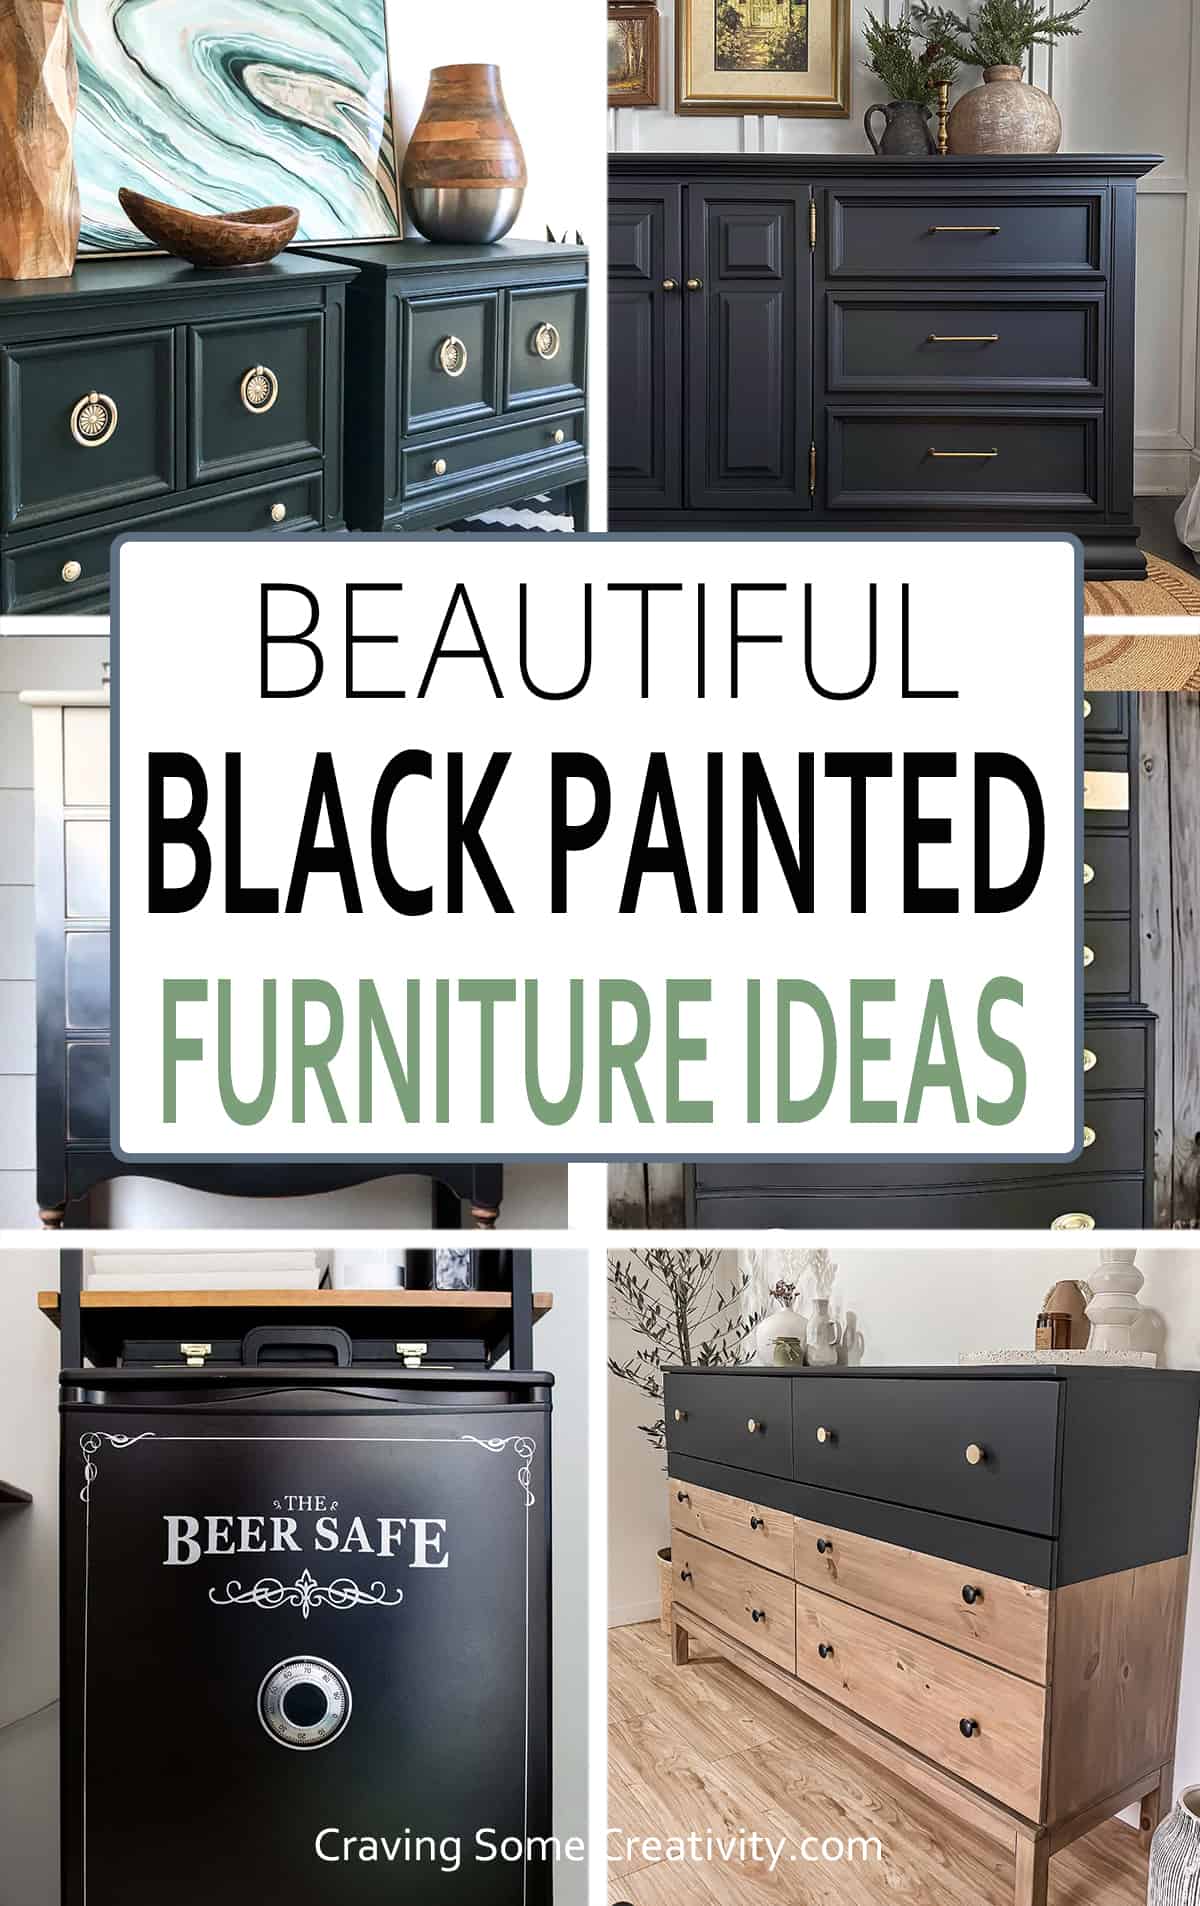 Collage of beautiful black furniture ideas with title overlay.